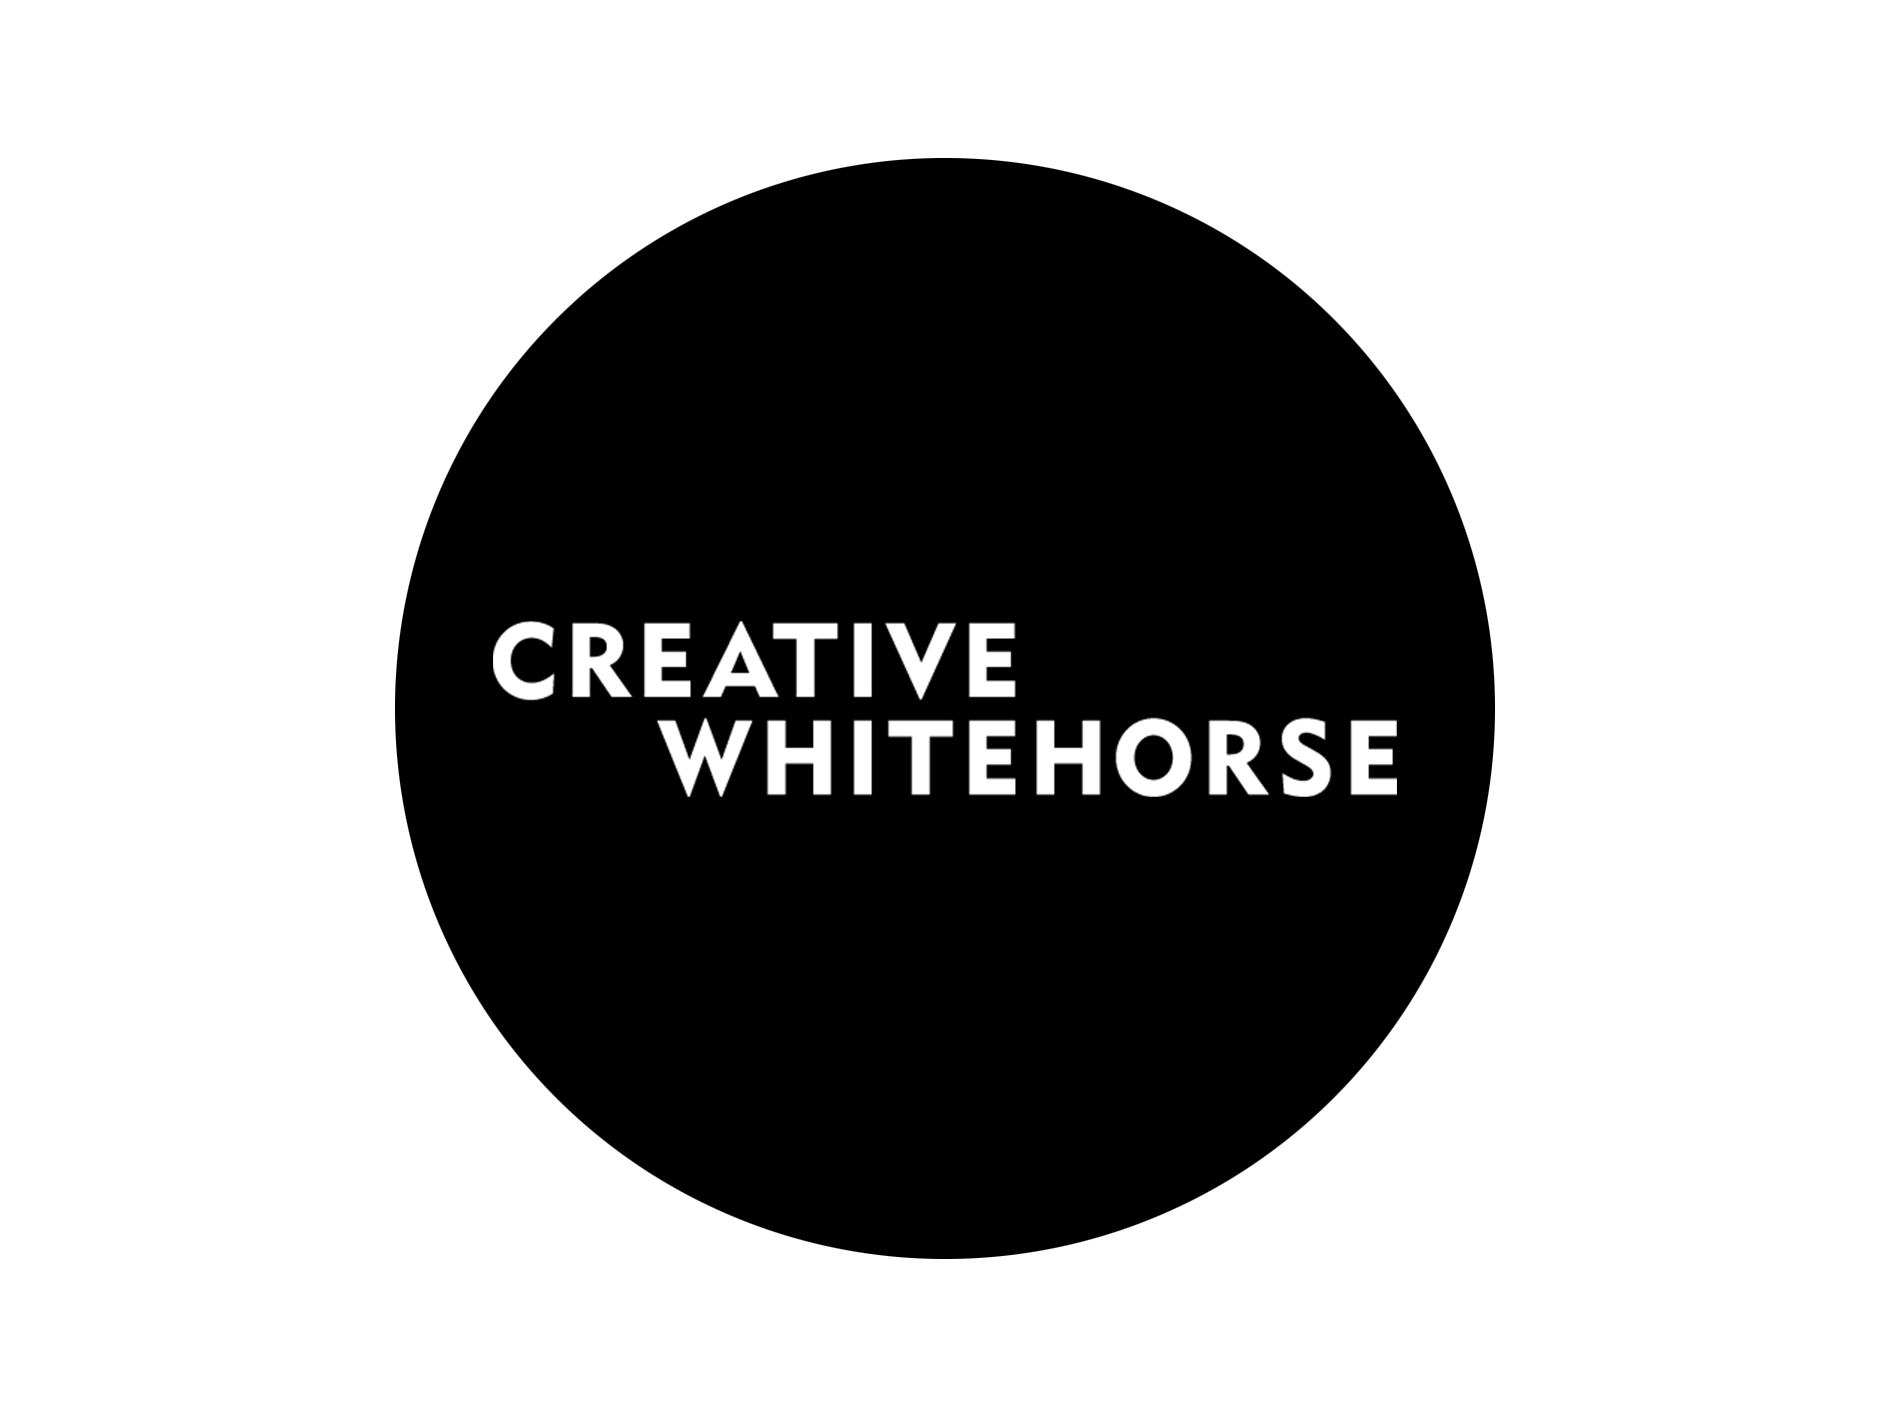 Creative whitehorse in white text against a black background